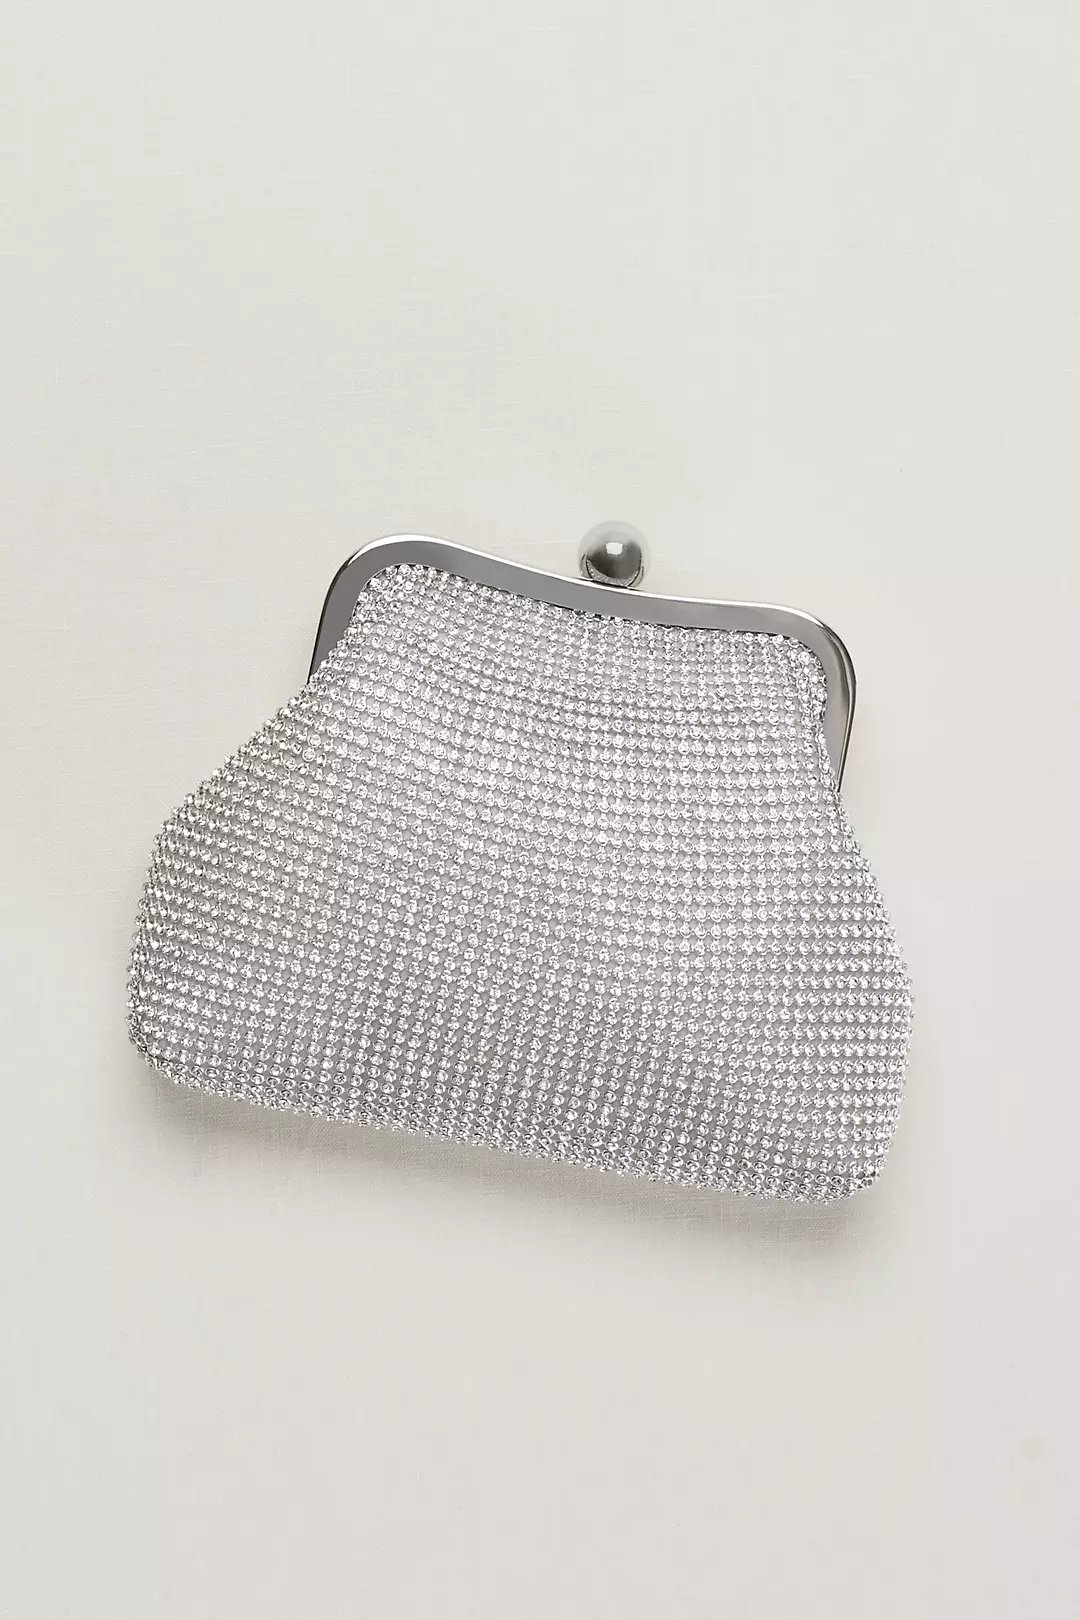 Crystal Mesh Coin Purse Image